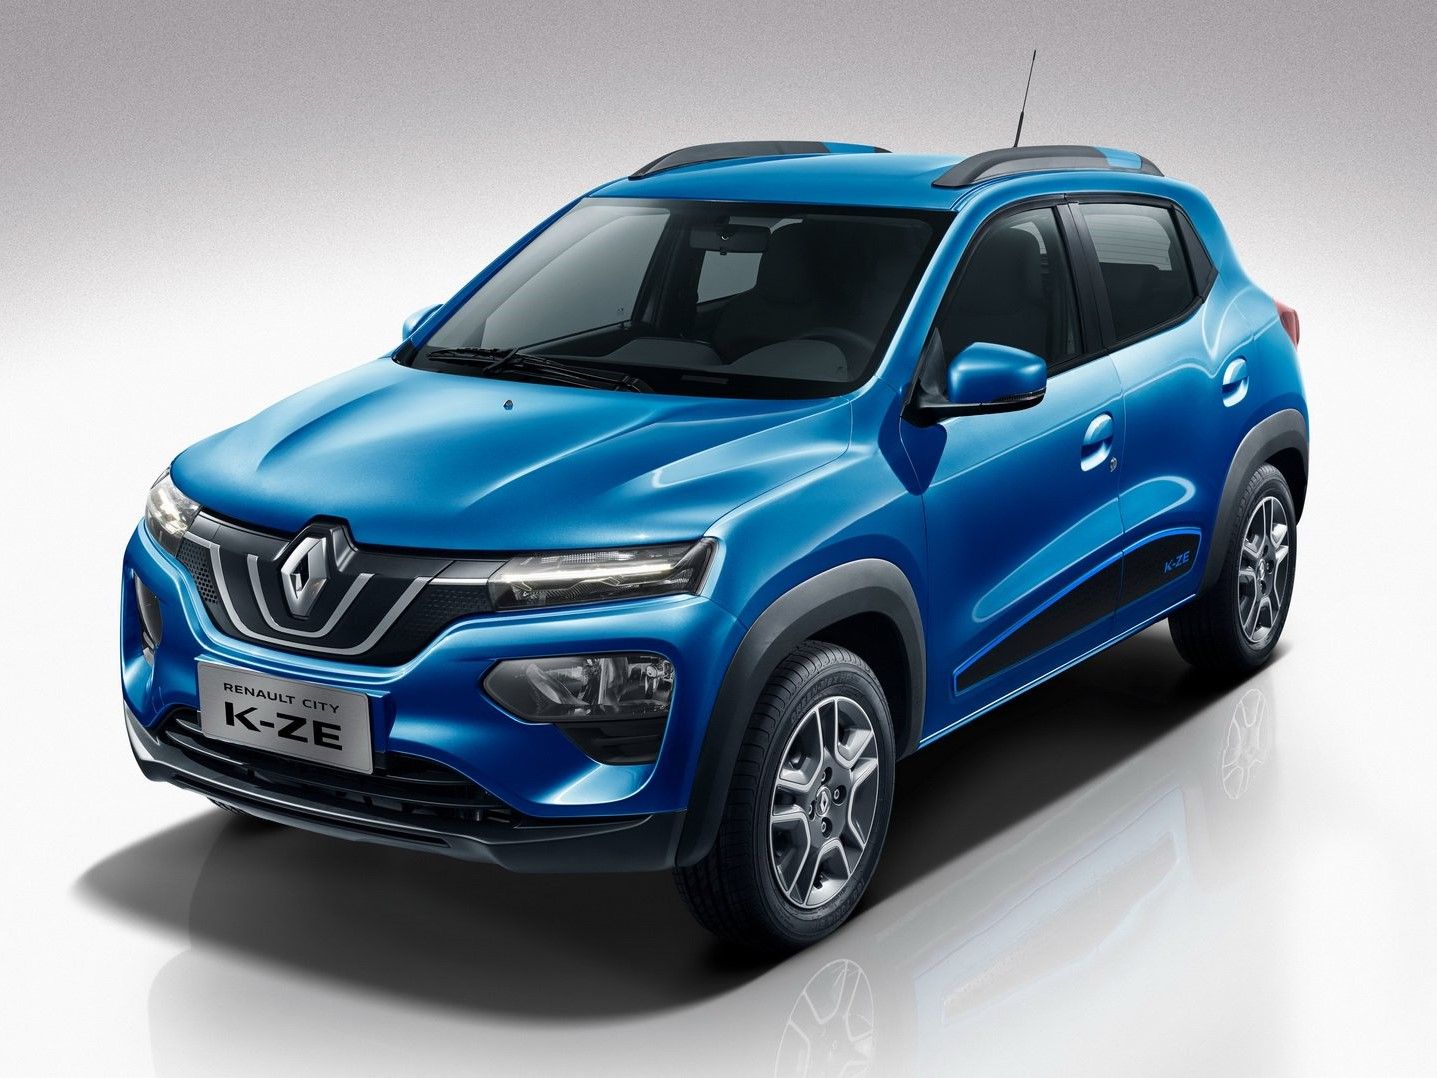 Renault Kwid EV Power, Range, Features Revealed; India Launch By 2022